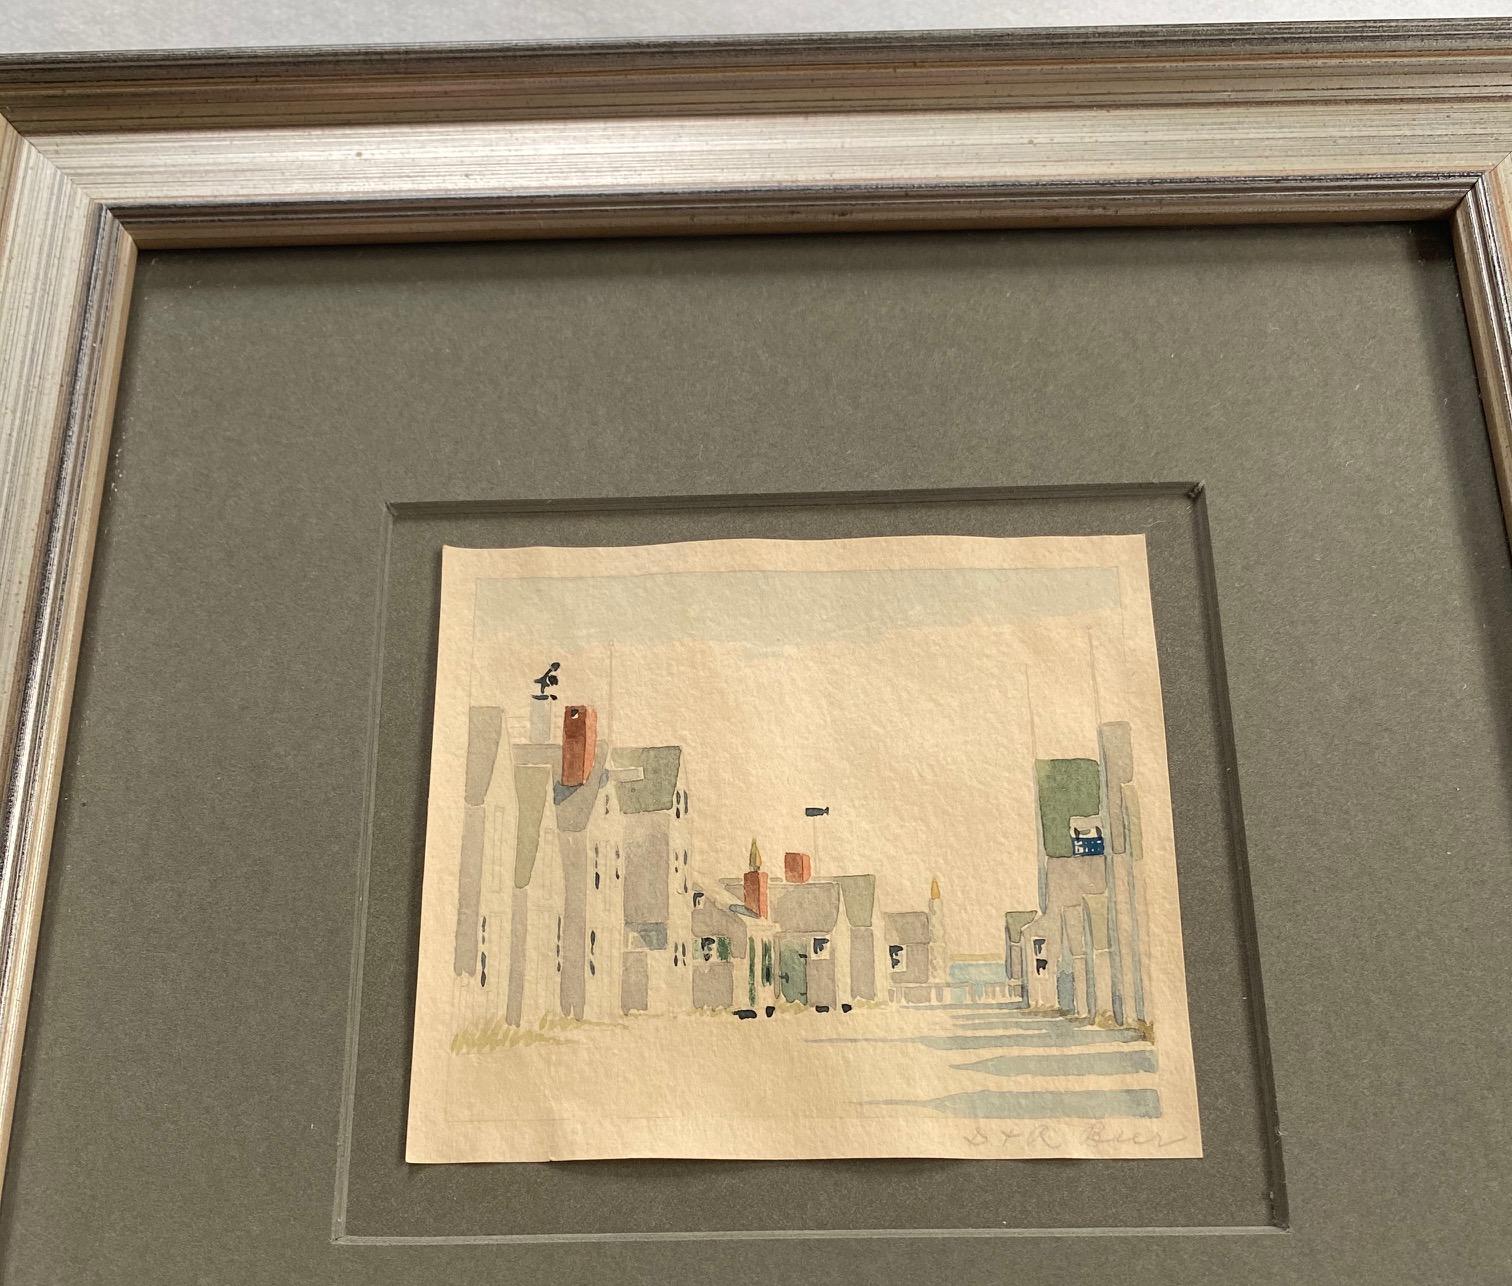 Vintage Nantucket Old North Wharf Watercolor by Doris & Richard Beer, circa 1940, a watercolor on paper view of Old North Wharf, signed in pencil power right. Doris and Richard Beer (1898-1967 and 1893-1959 respectively) produced a well-known series